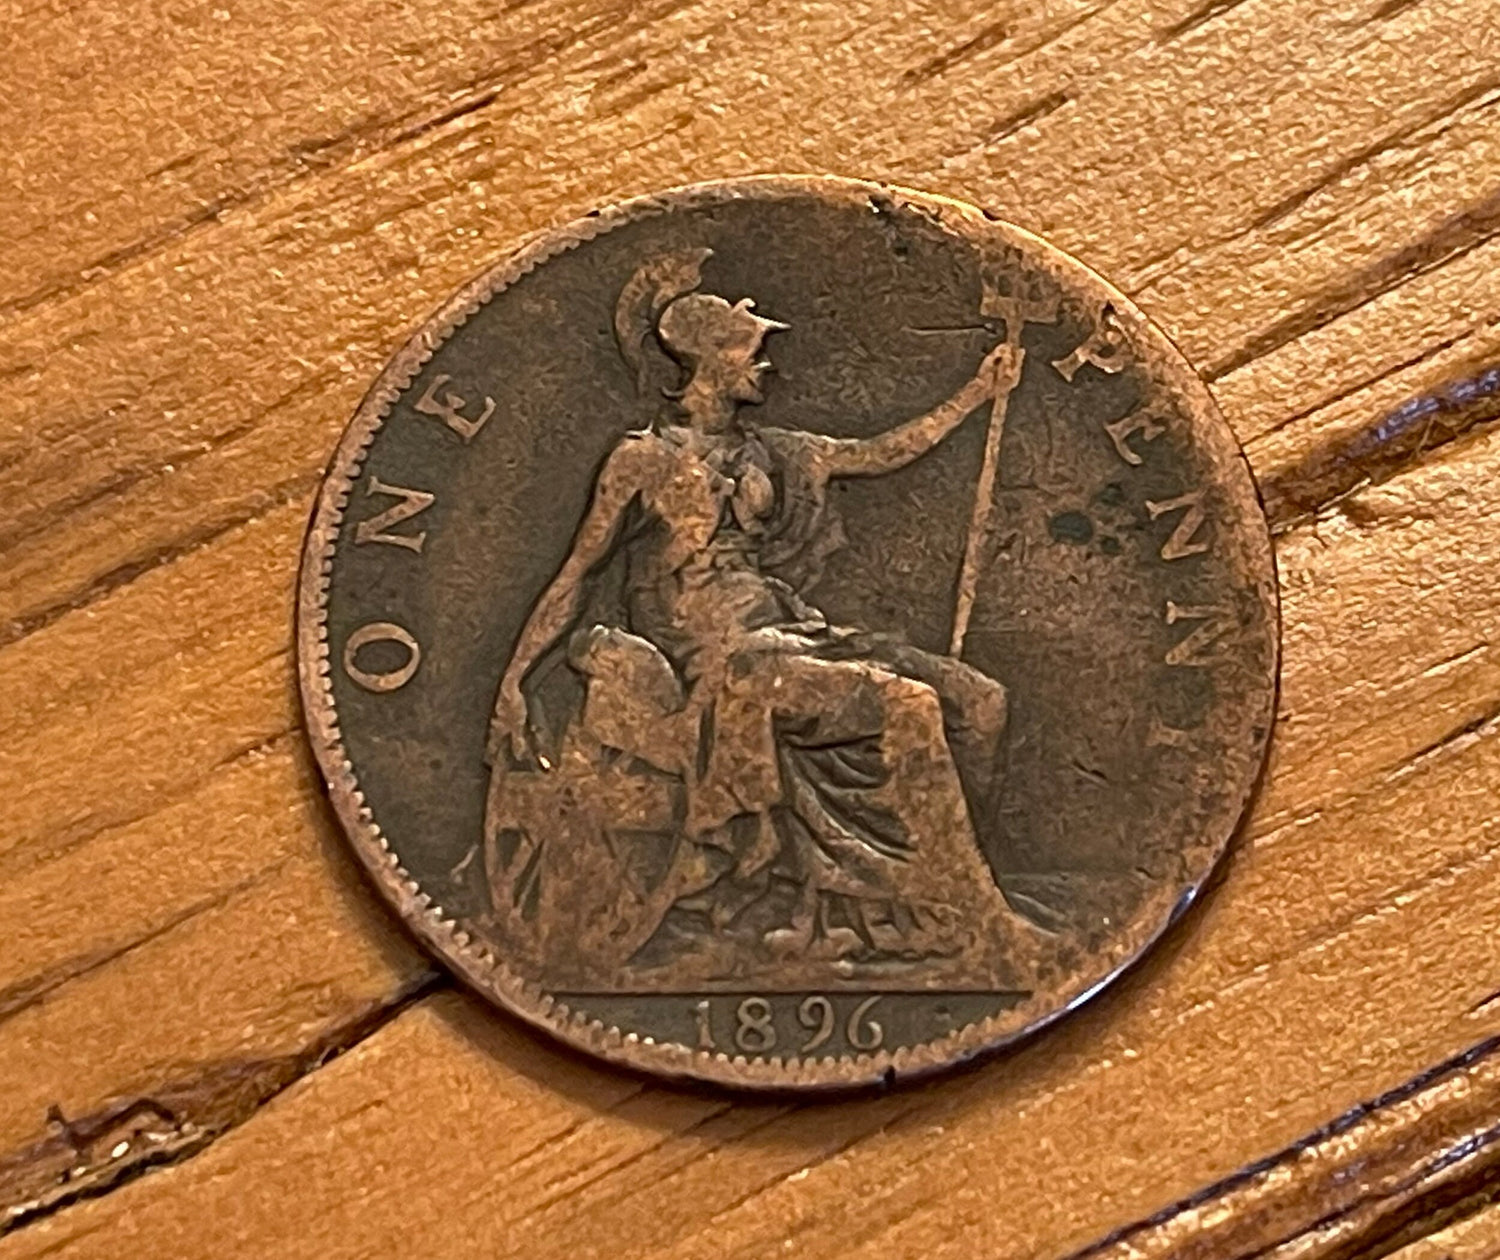 Queen Victoria (3rd Portrait) & Britannia Great Britain 1 Penny Authentic Coin Money Cent for Jewelry -- Condition is Only FAIR